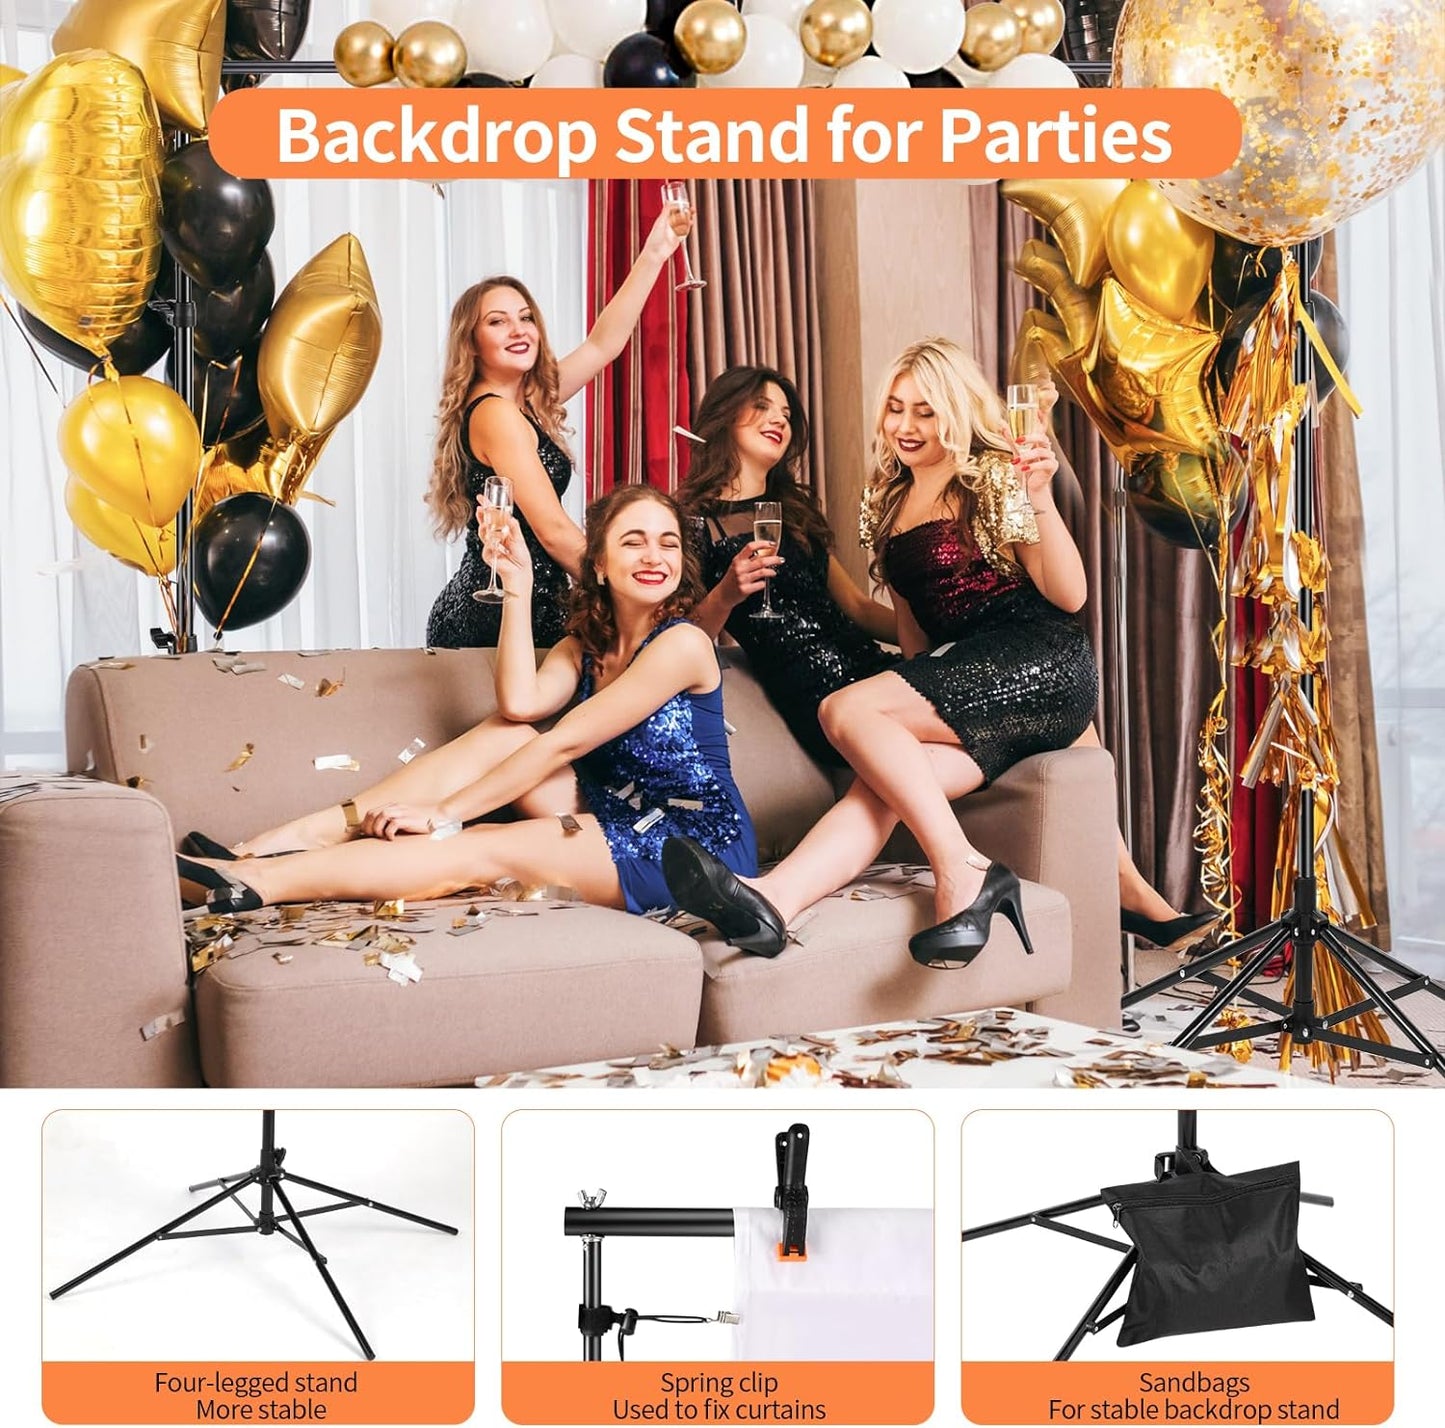 Backdrop Stand 8.5x10ft, Photo Video Studio Adjustable Backdrop Stand